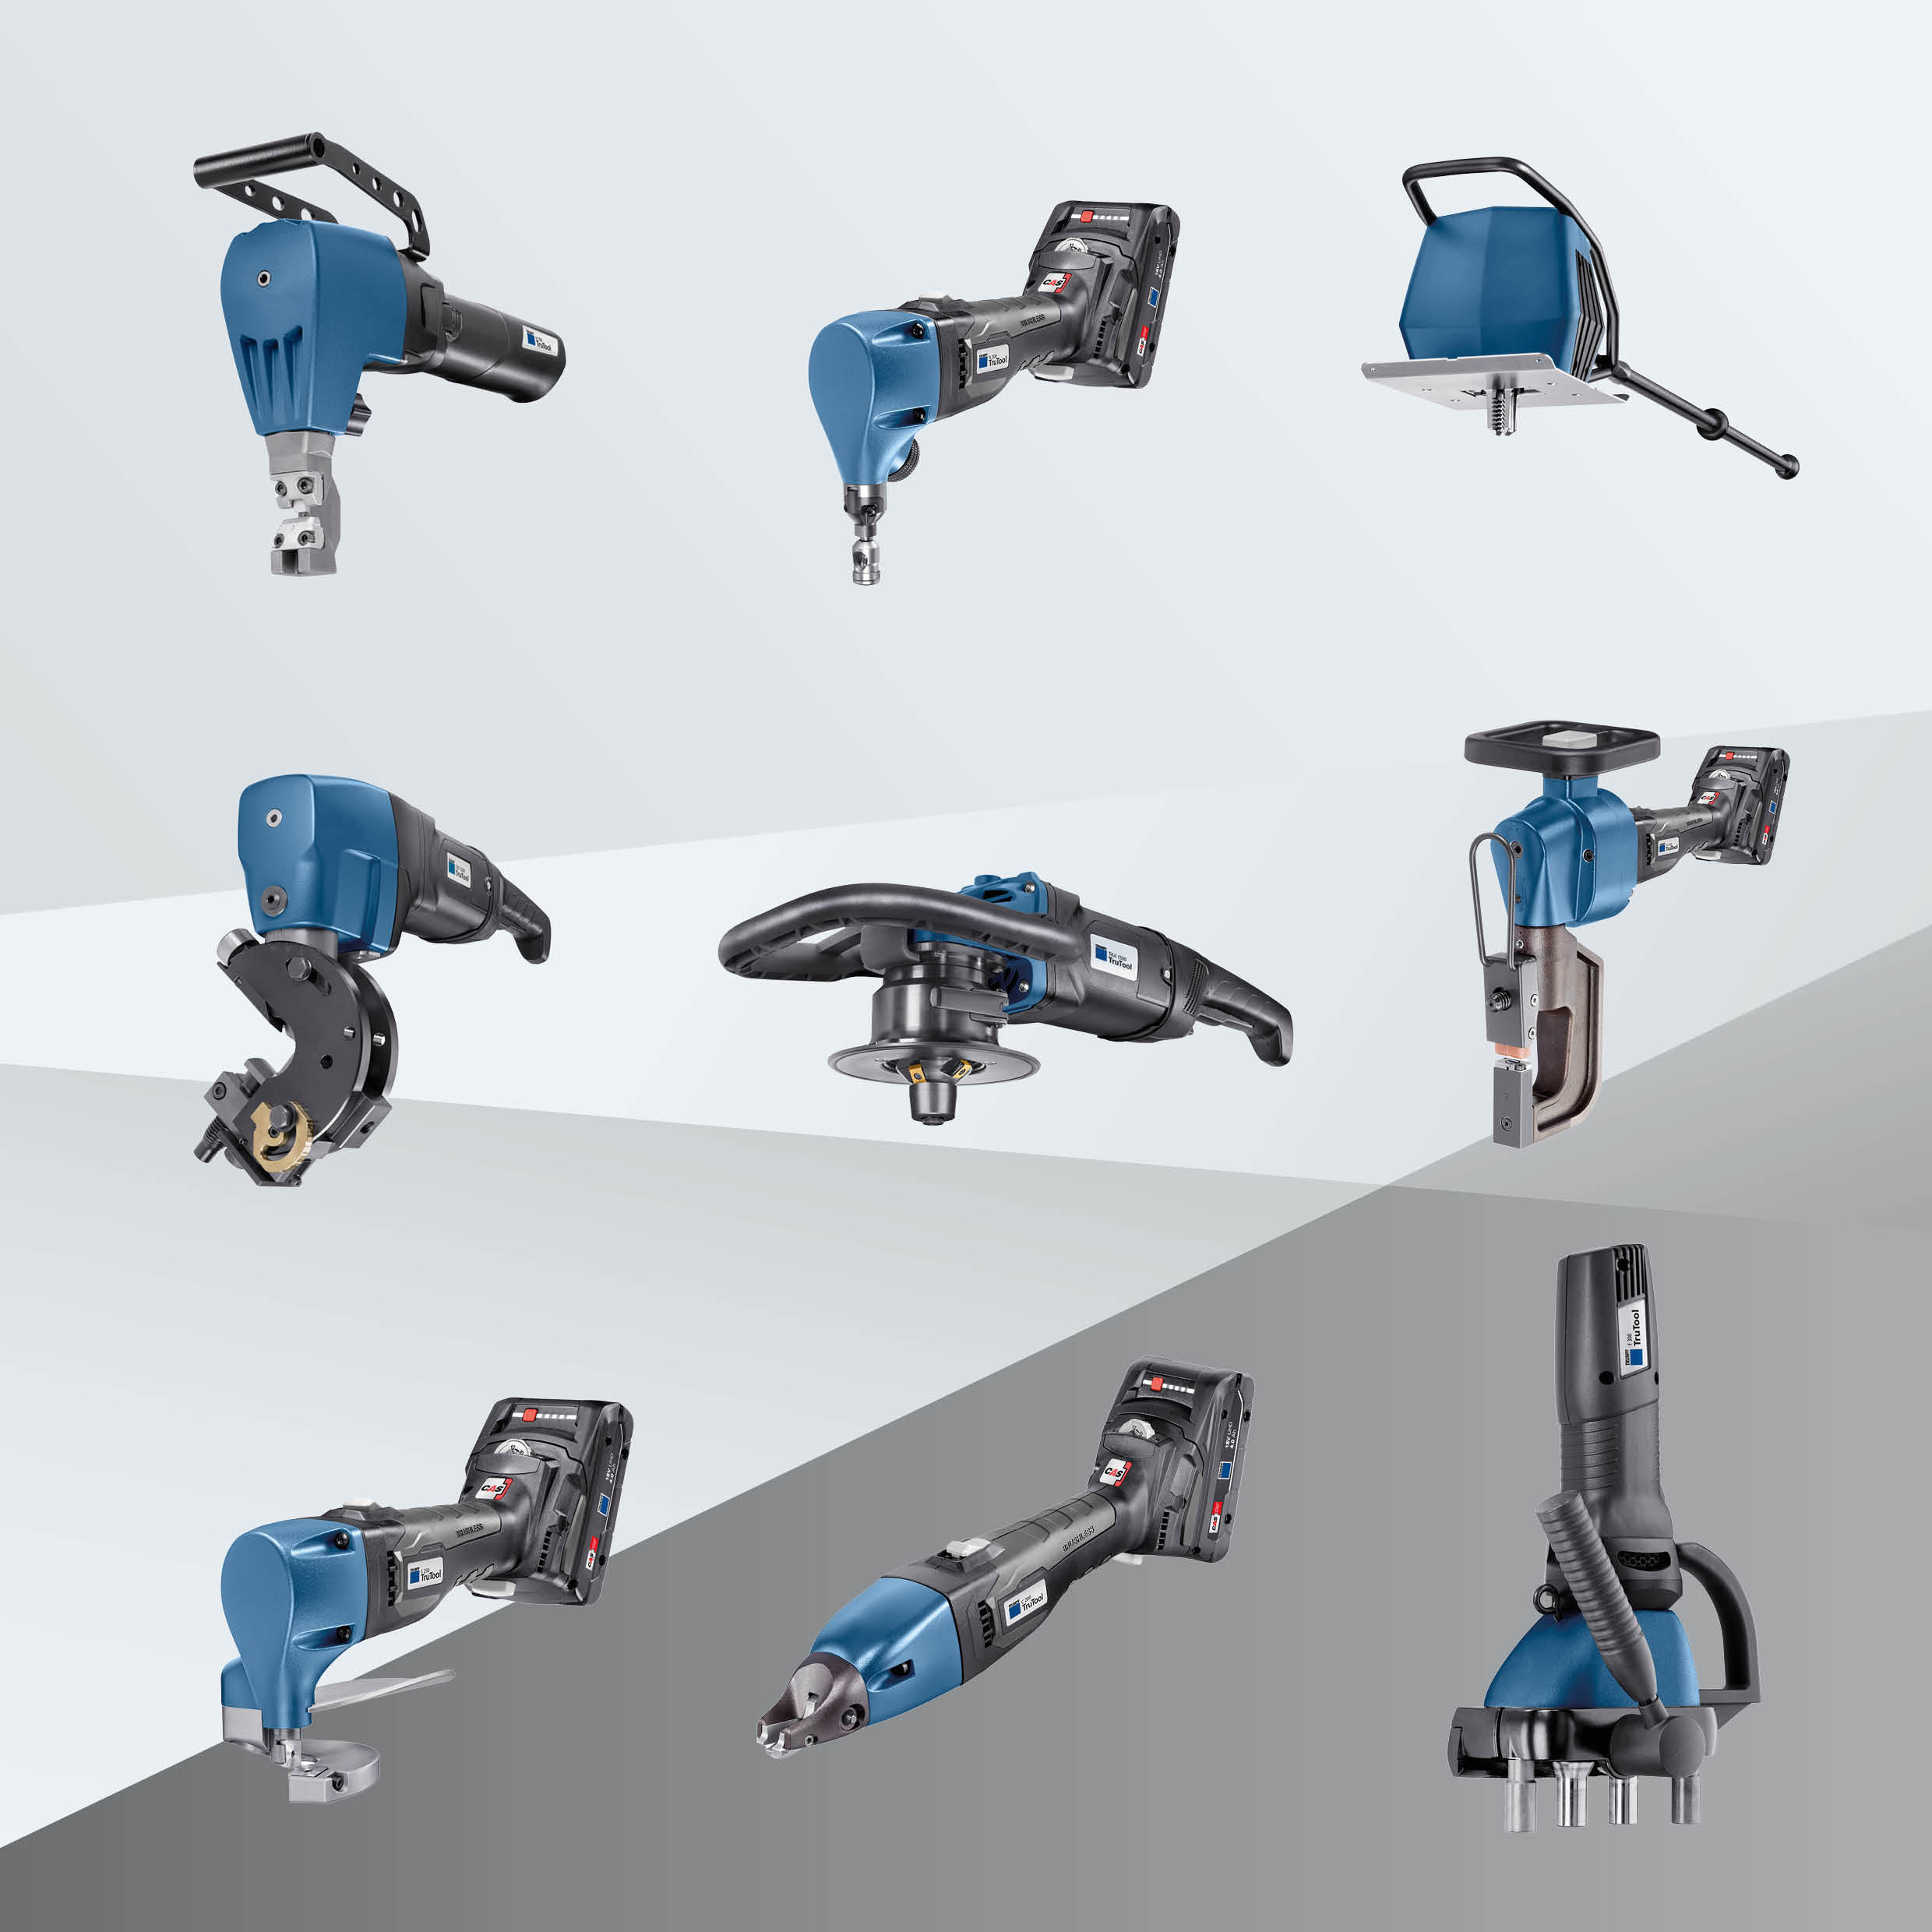 Today, Trumpf's Power Tools division offers a wide range of power tools, ... © Trumpf